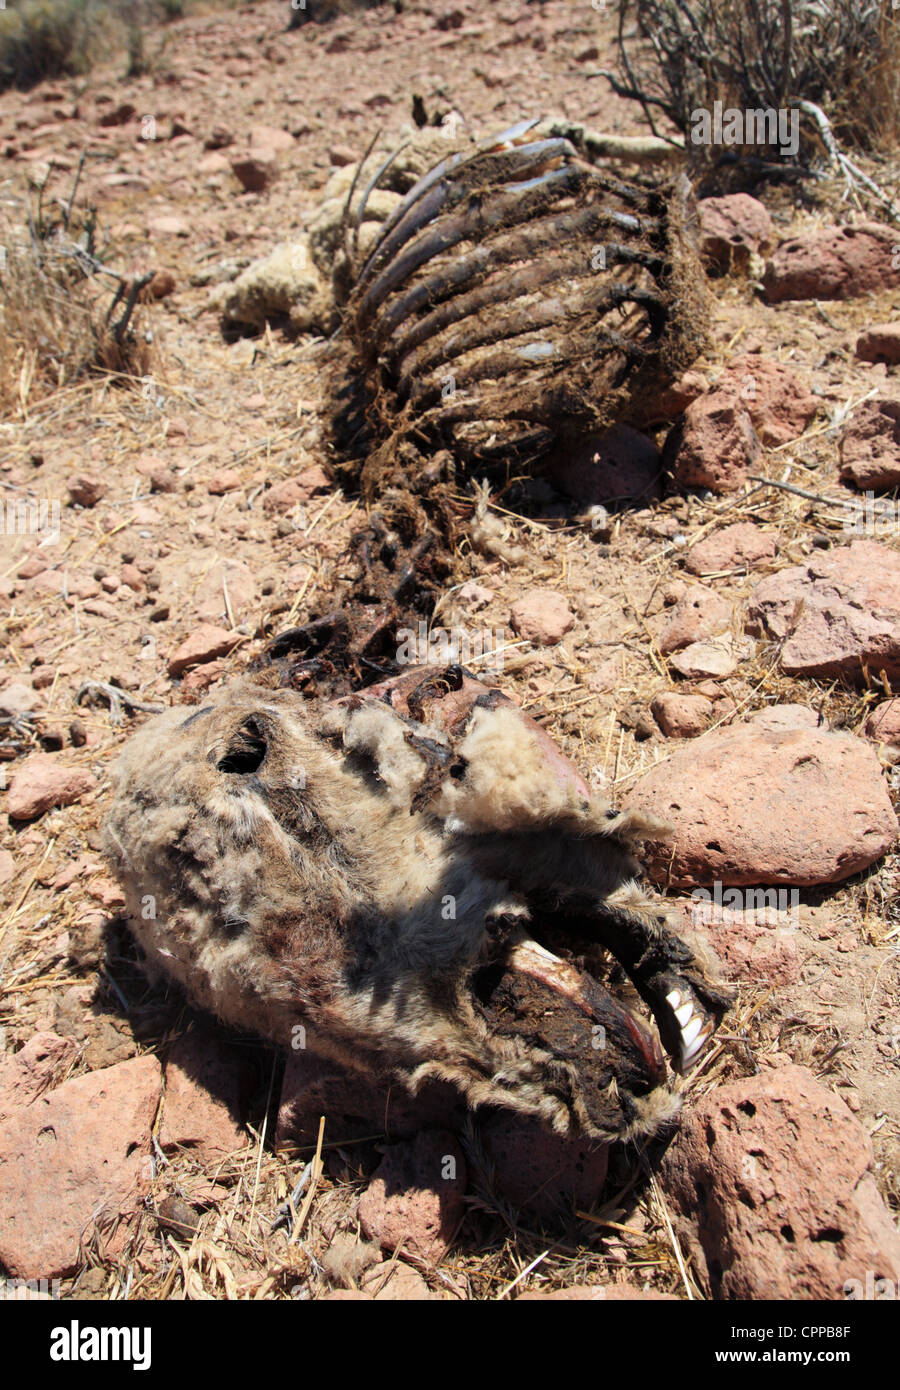 dead sheep carcass that has been picked over by scavengers and dessicated in the desert sun Stock Photo